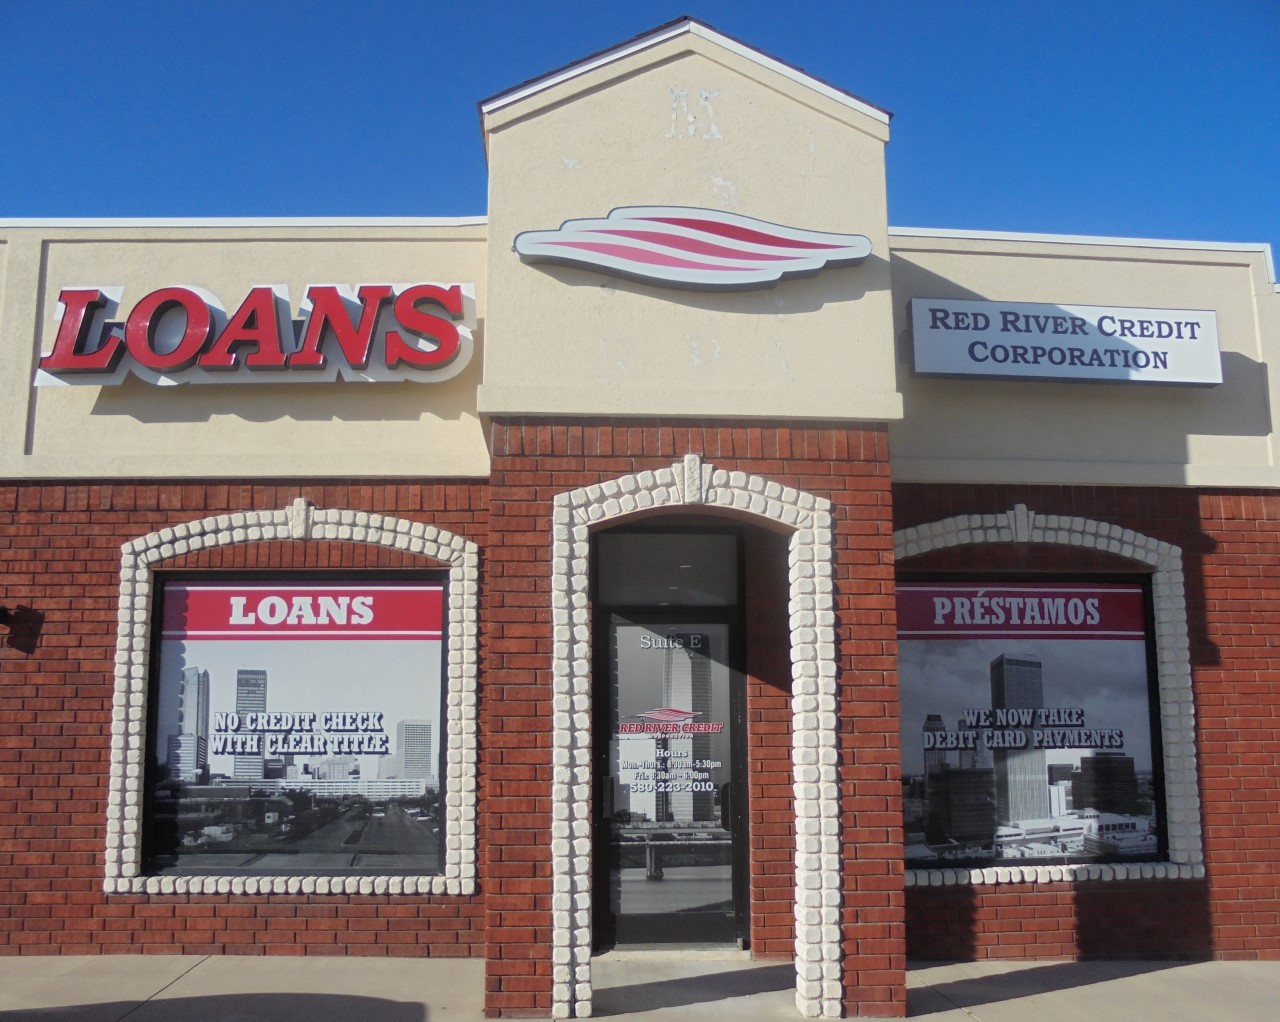 No Credit Payday Loans in Ardmore, OK